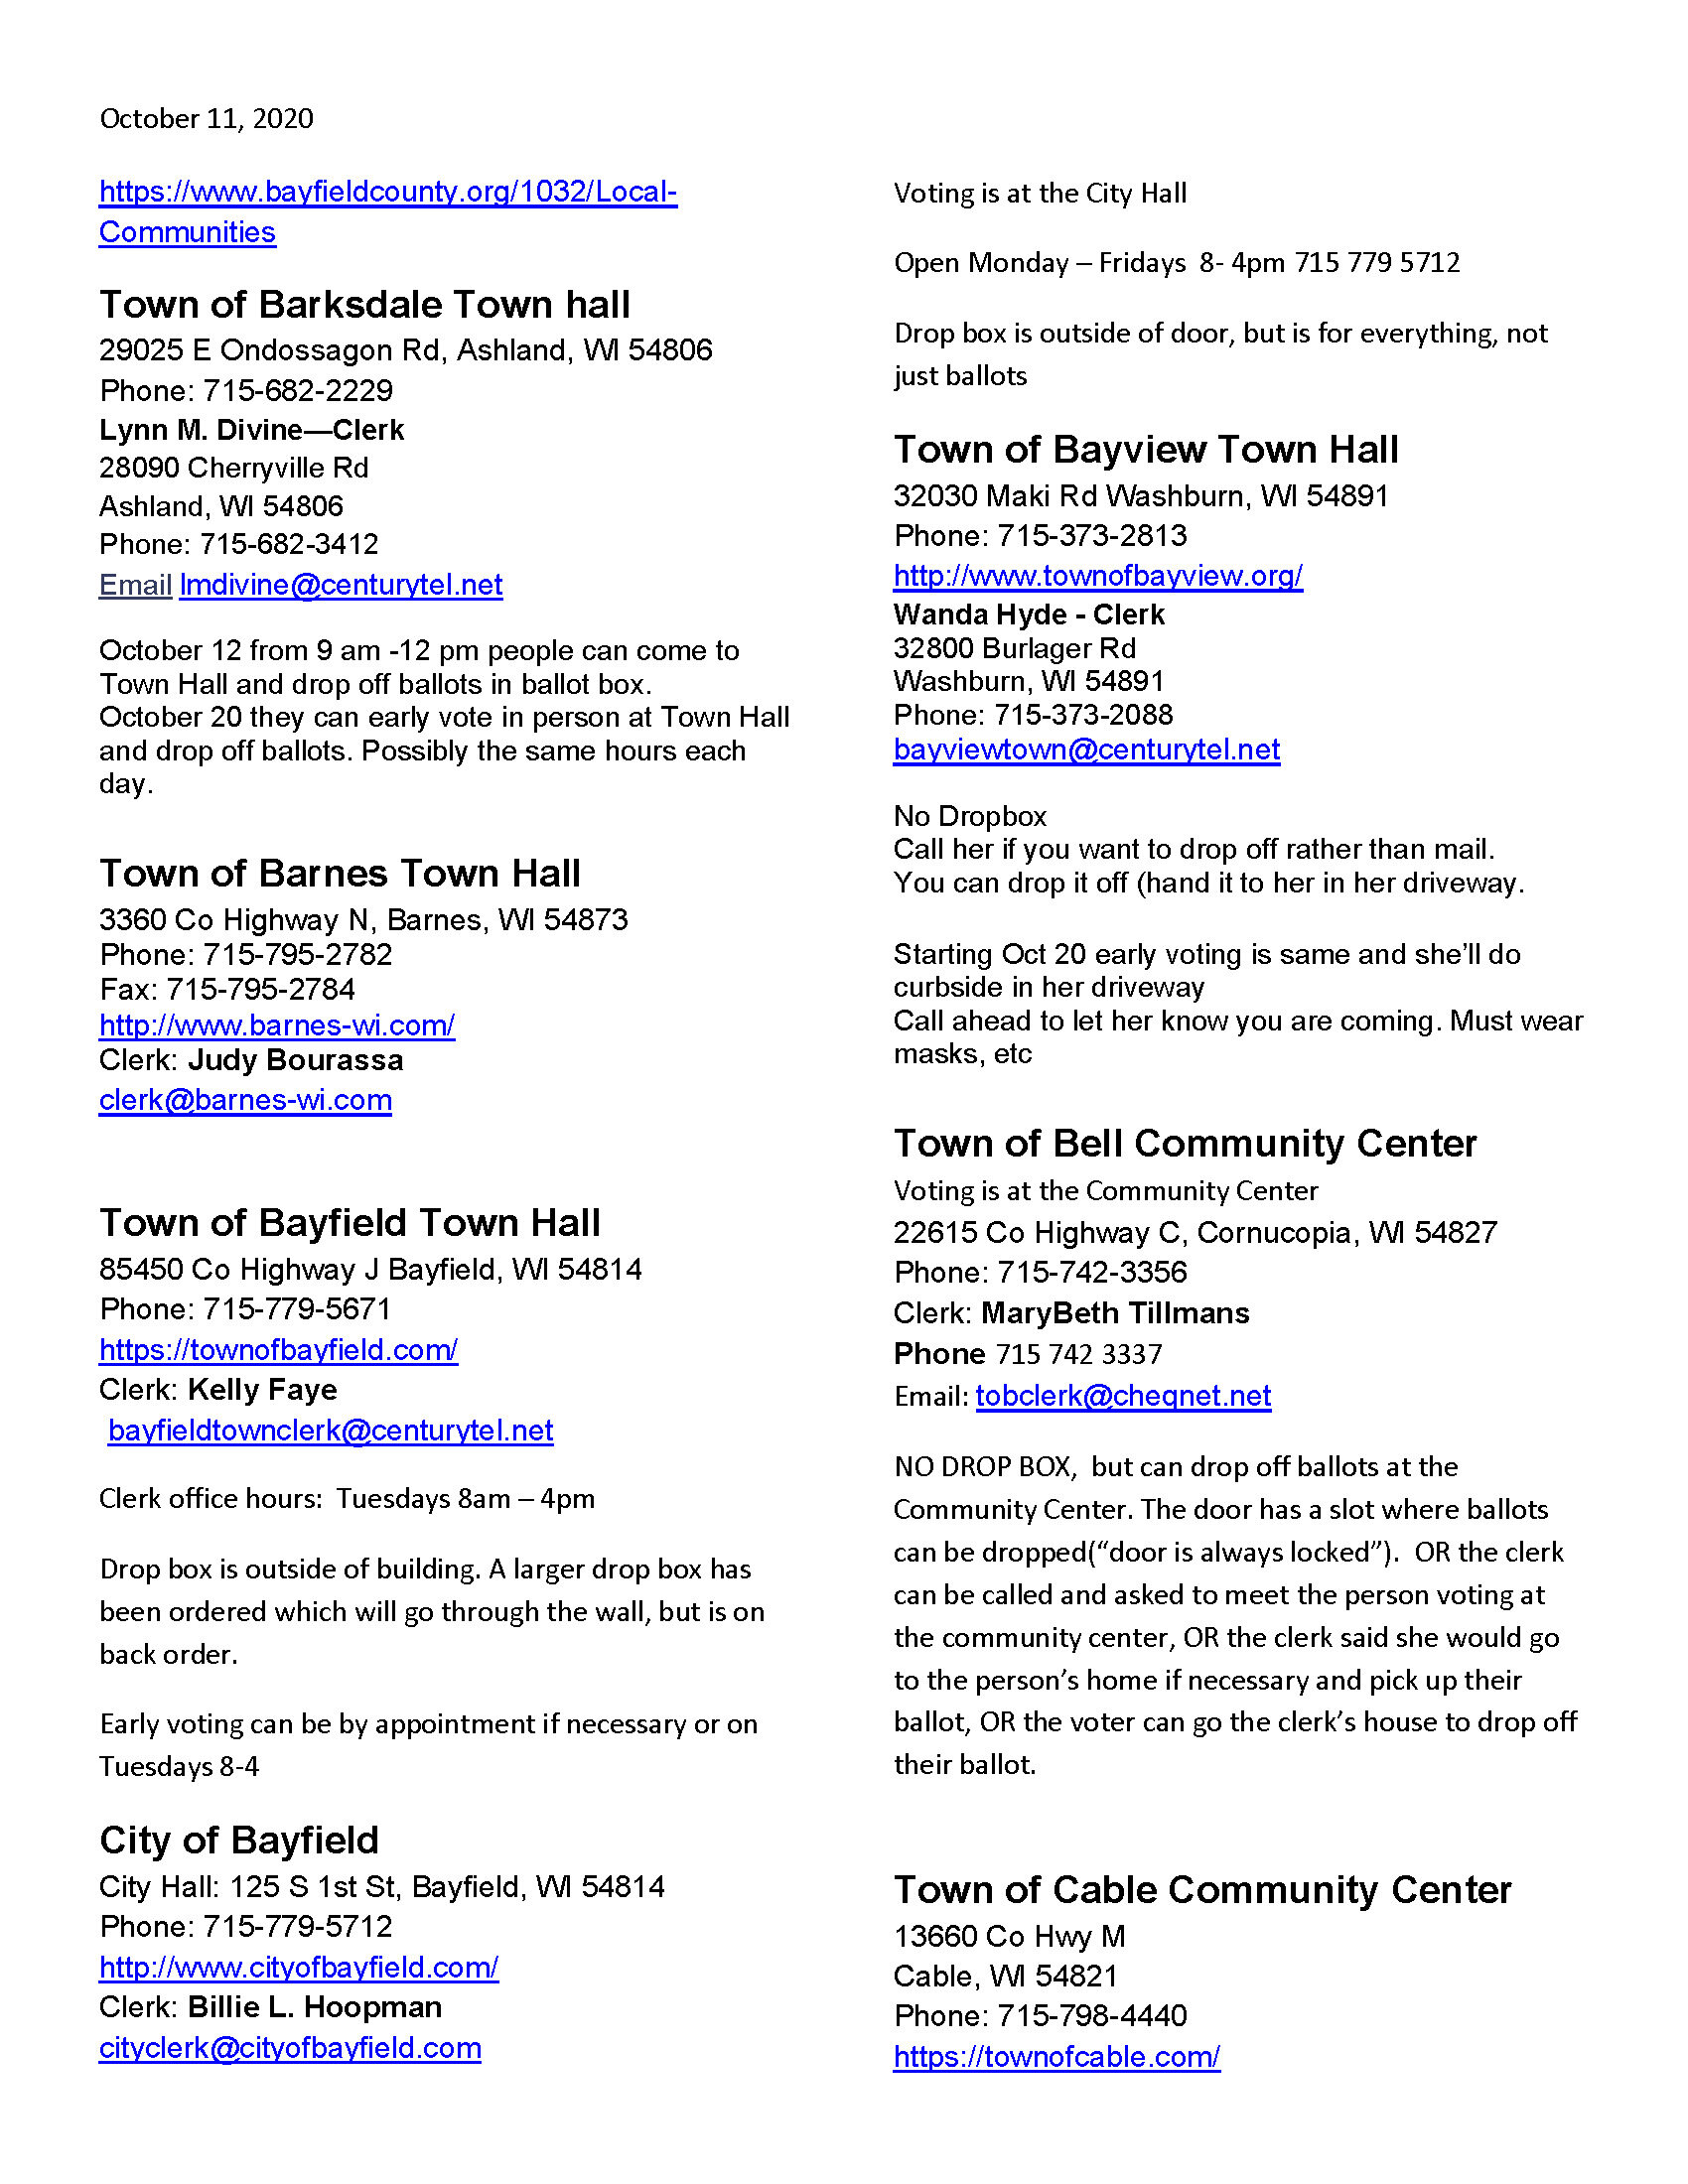 Bayfield County Municipalities Dropbox locations and Voting prior to Election_Page_1.jpg